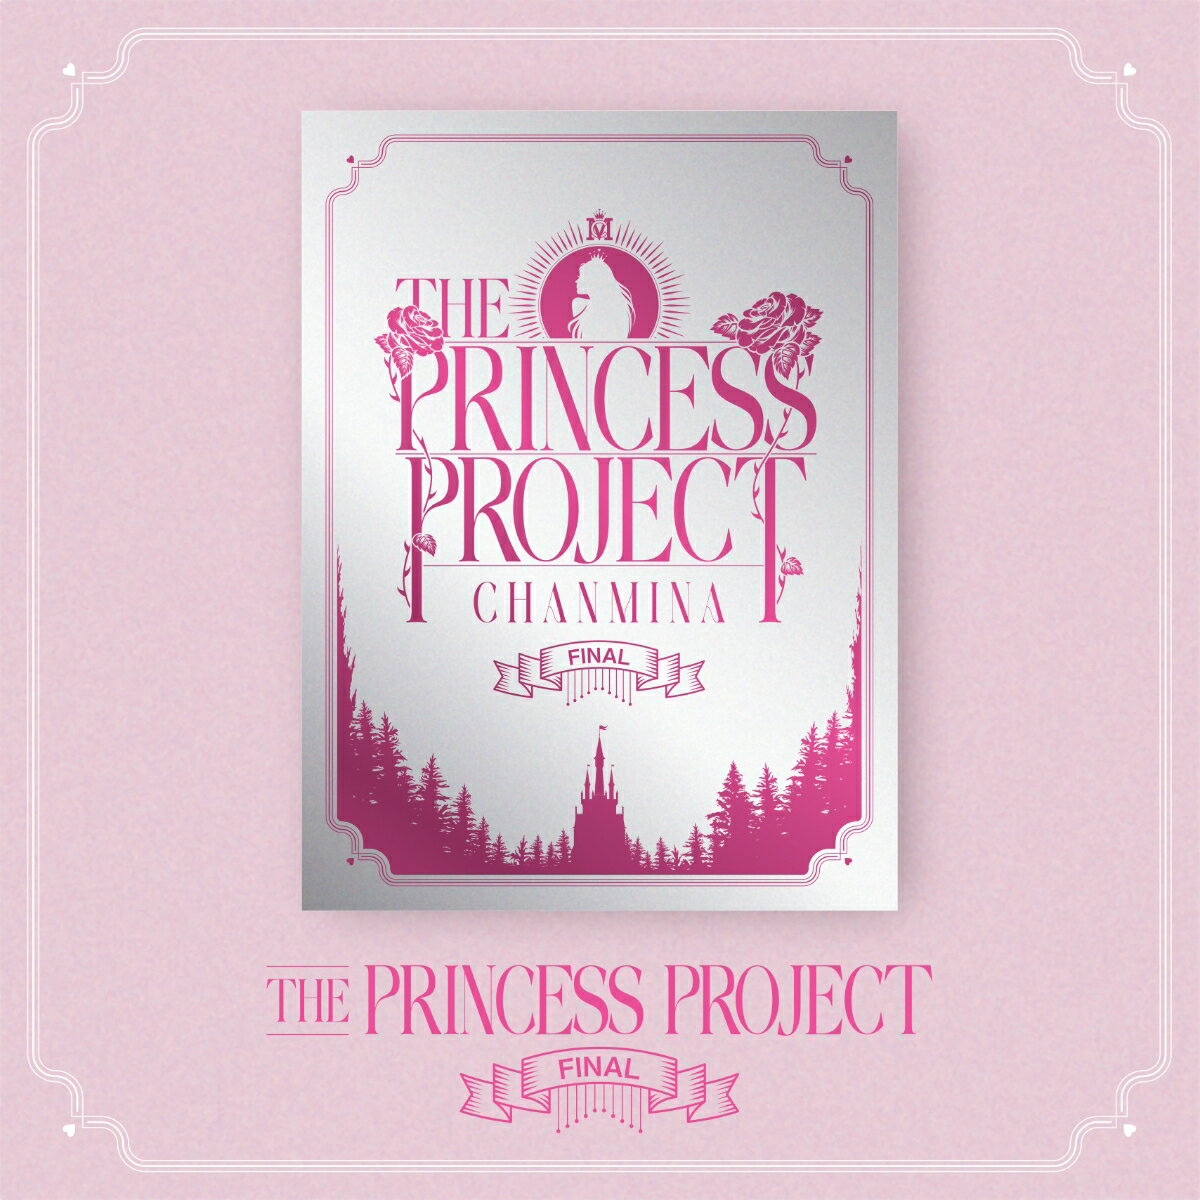 THE PRINCESS PROJECT - FINAL -(1DVD)